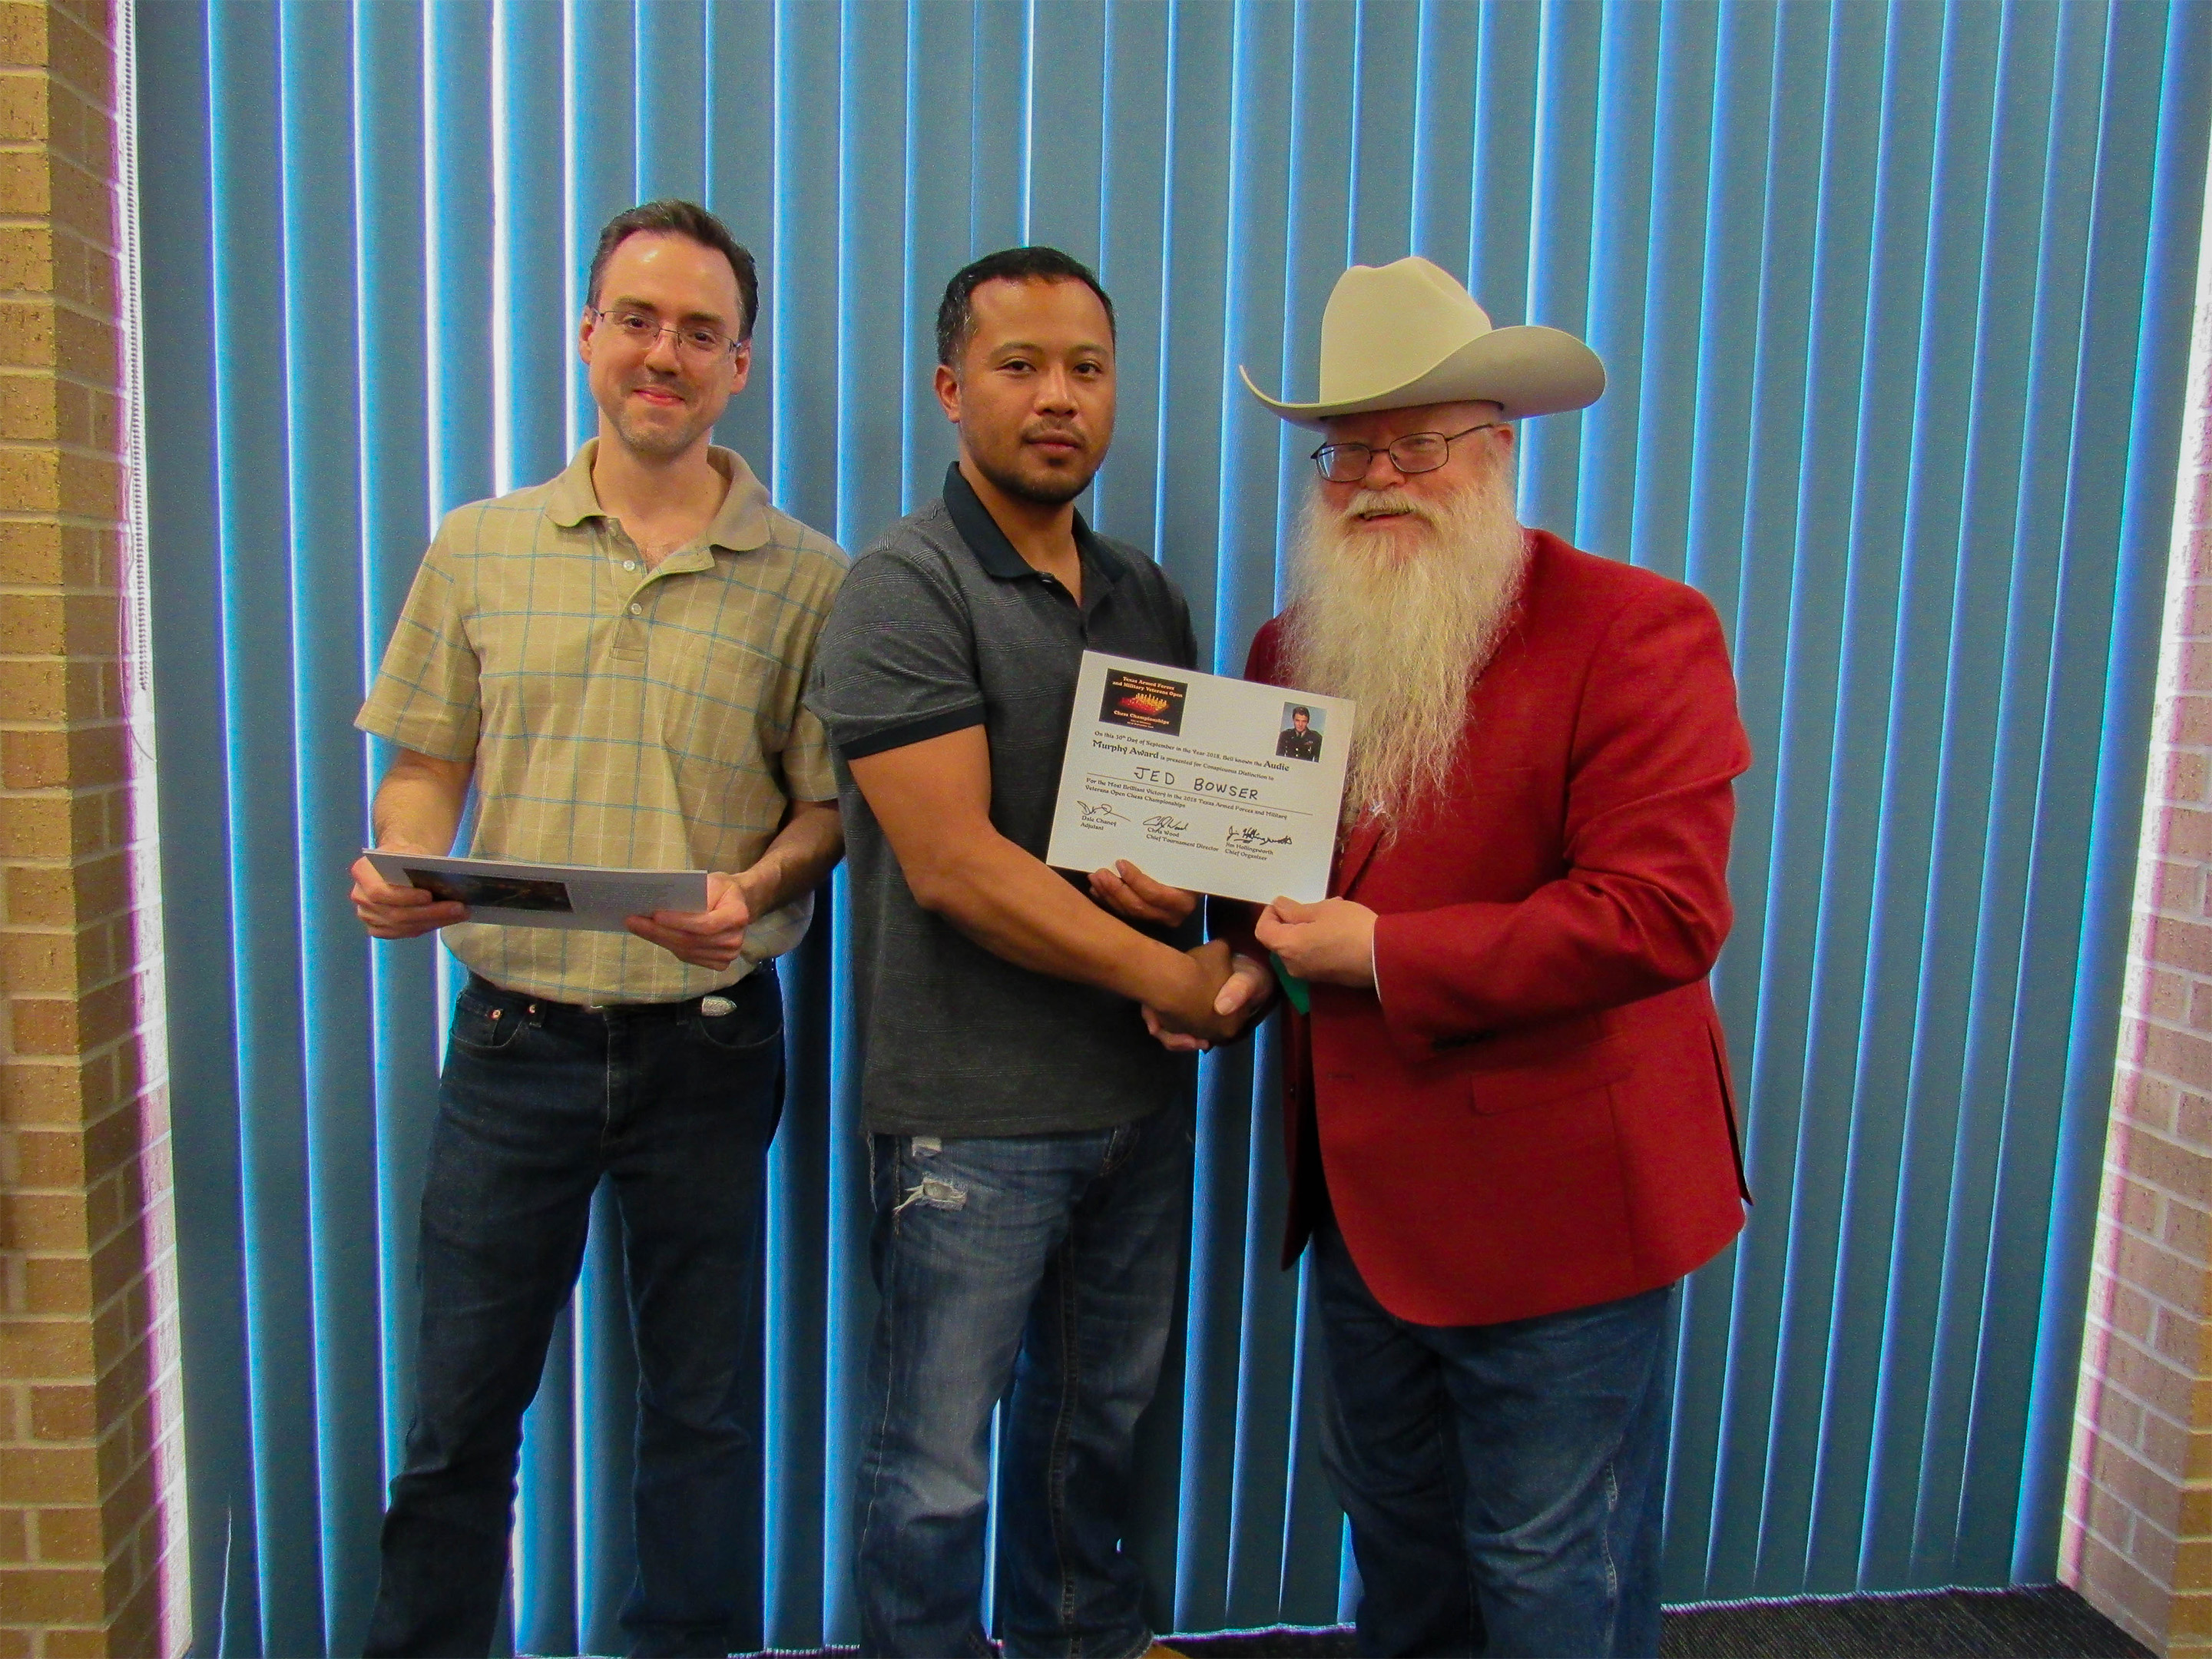 Jedwayne Bowser won the Audie Murphy Award for playing the white-side of the Smith-Morra Gambit brilliantly against an expert (center in the photo).  Games Judge Jeffrey Spyrison (left) and Chief Organizer Jim Hollingsworth (right) presented the award.  Photo by Sheryl McBroom.